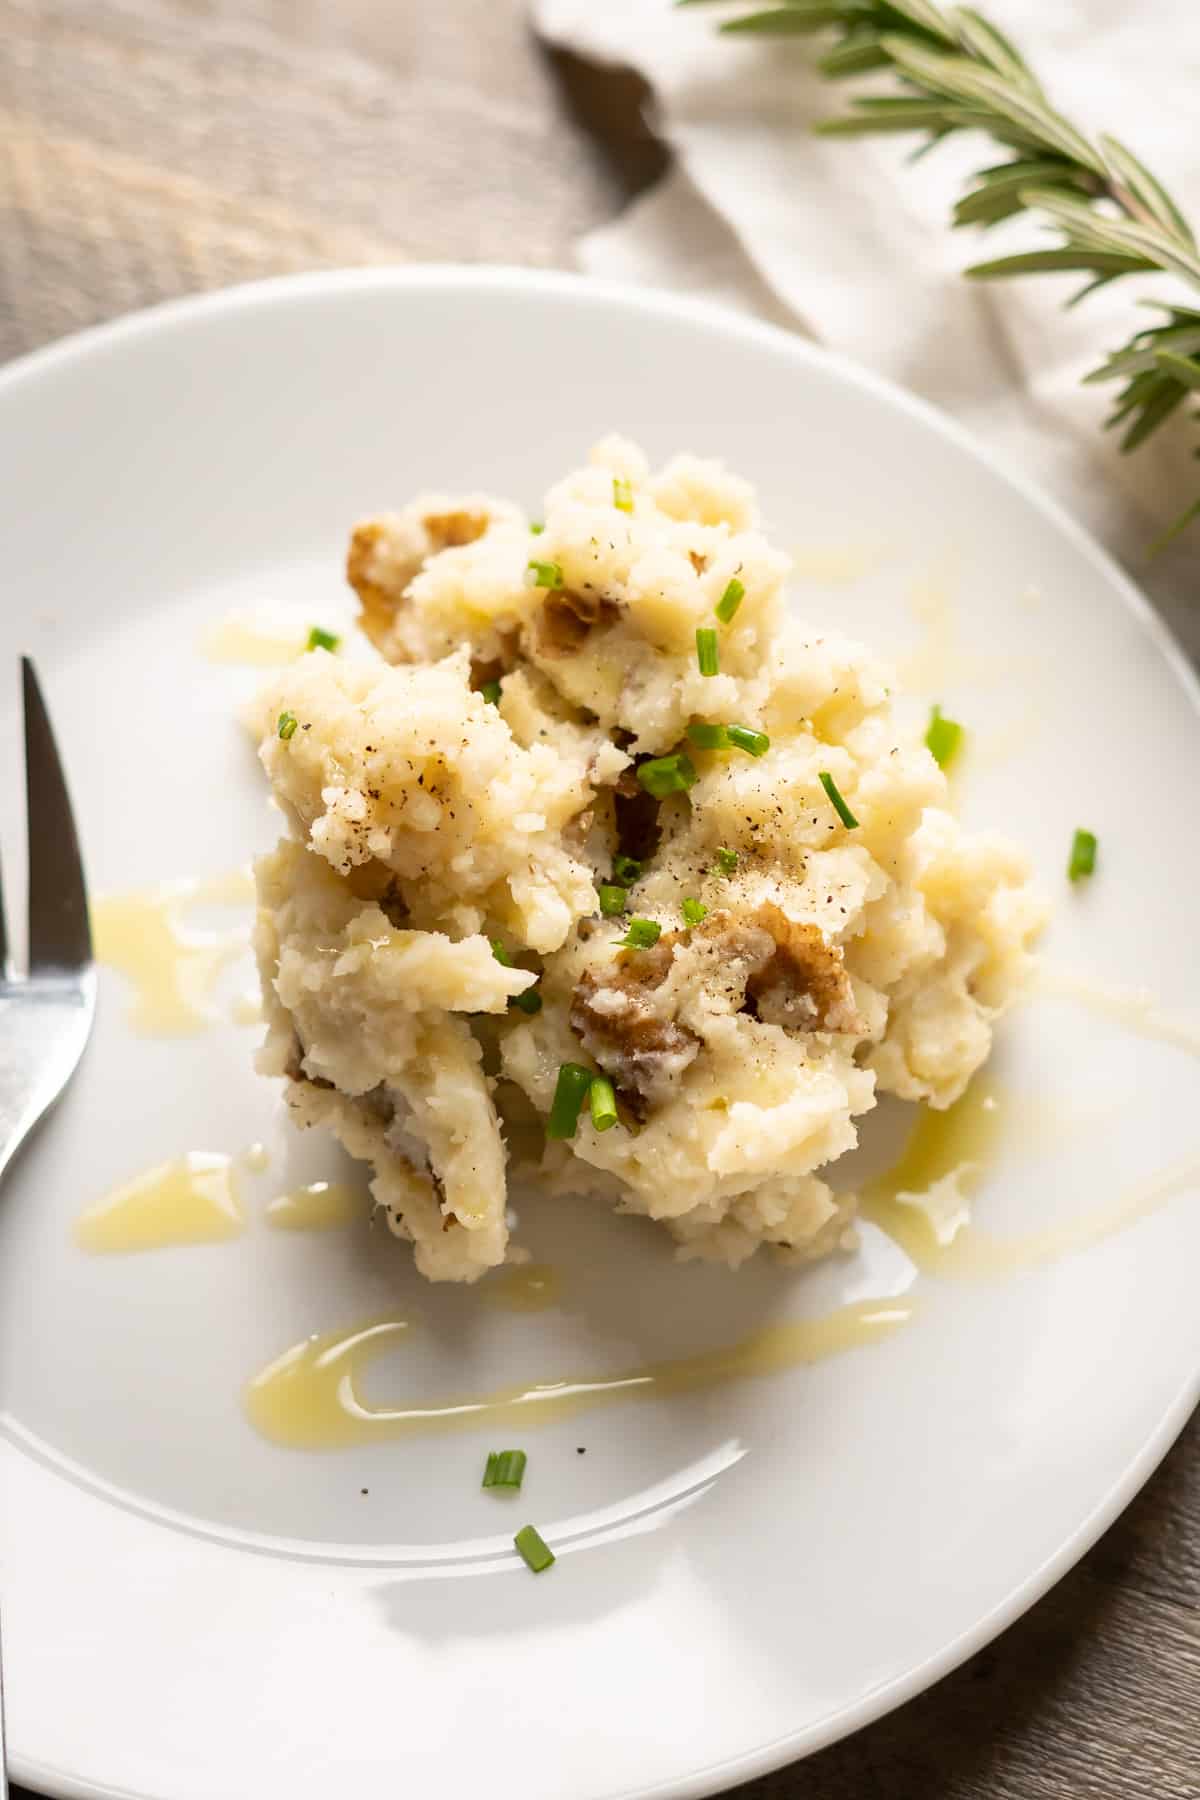 A serving of dairy-free mashed potatoes garnished with green onions on a plate ready to serve.